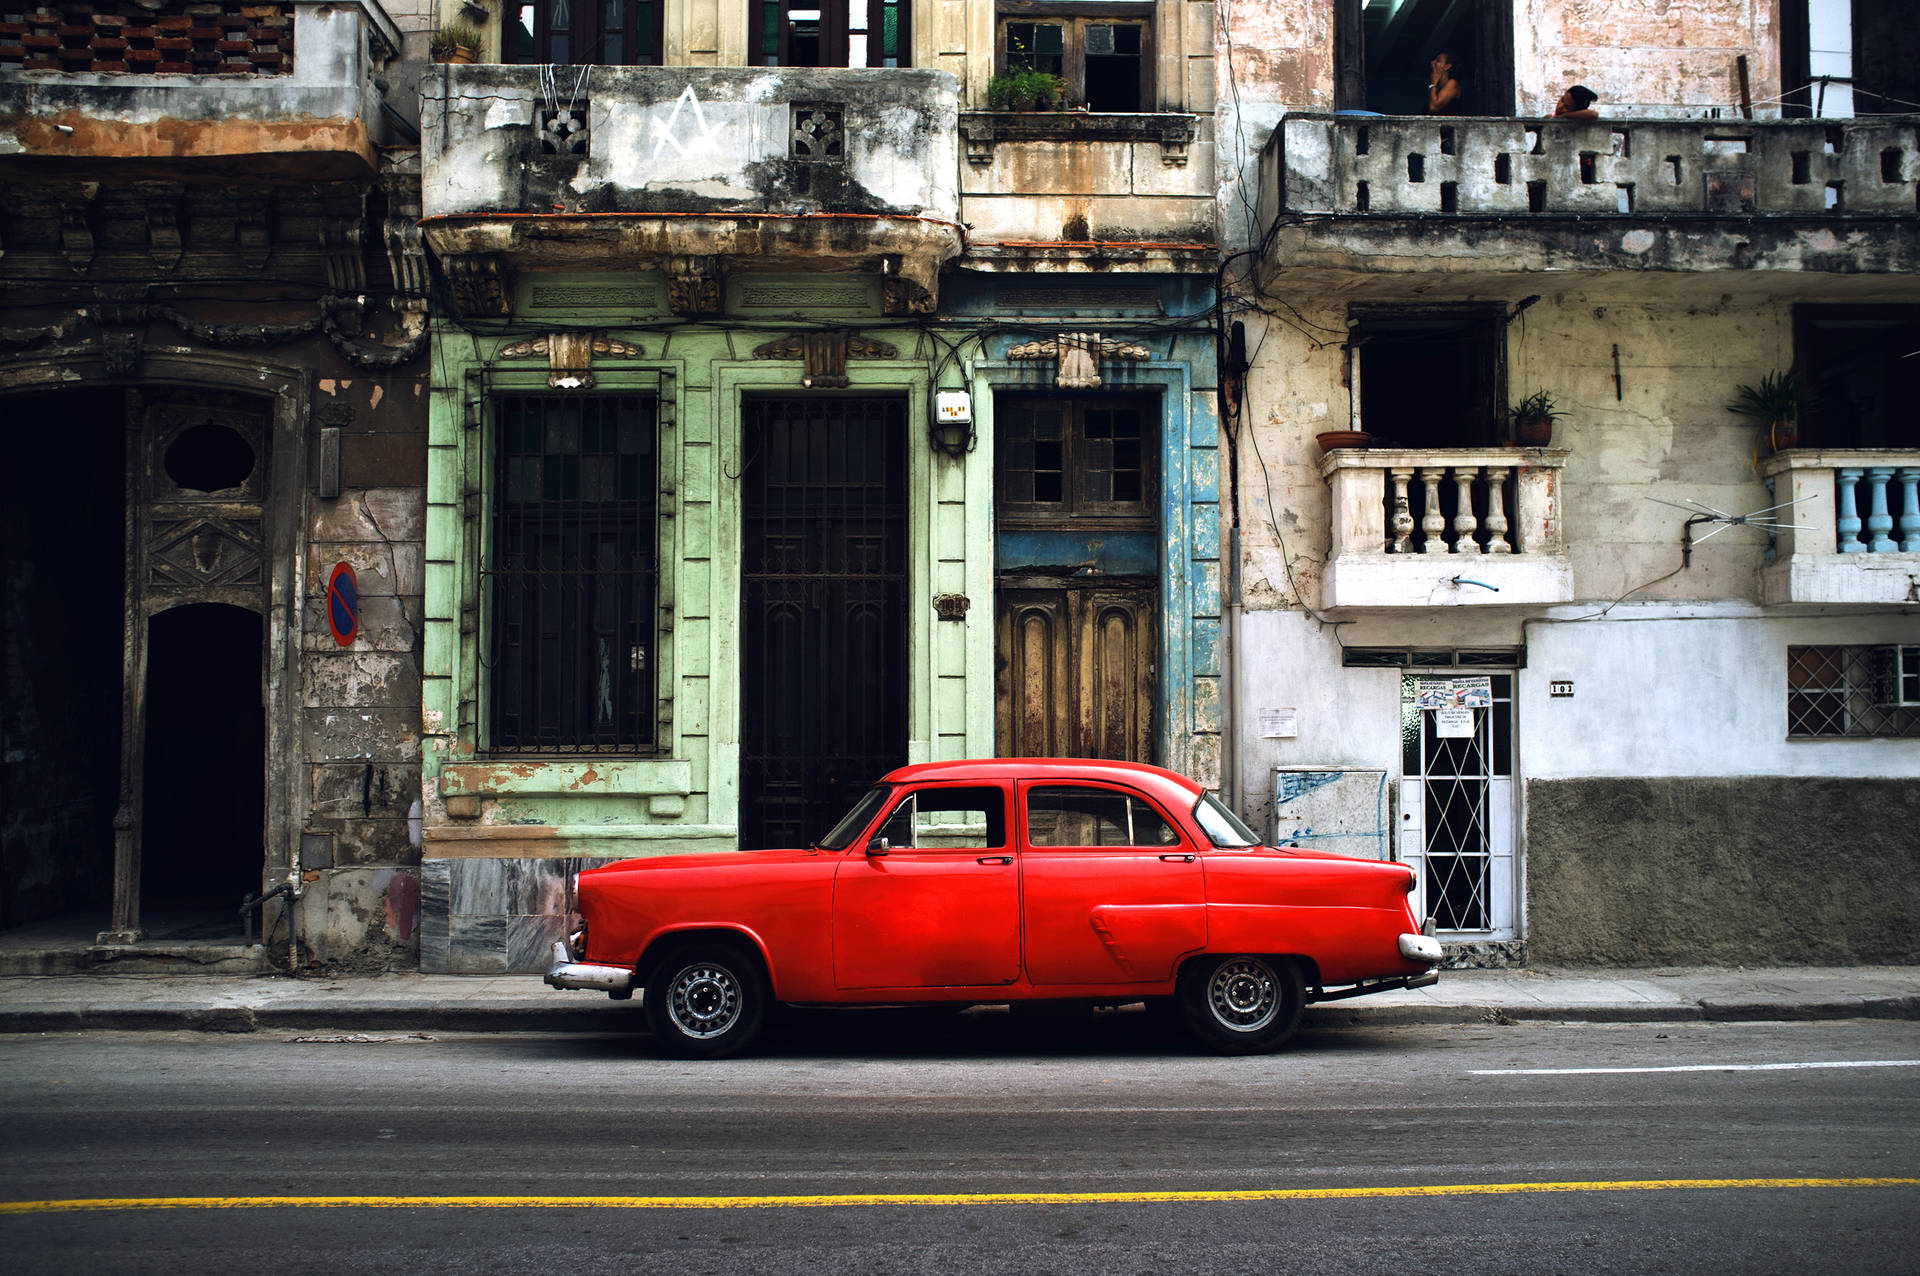 Car Parked On The Road In Cuba Background